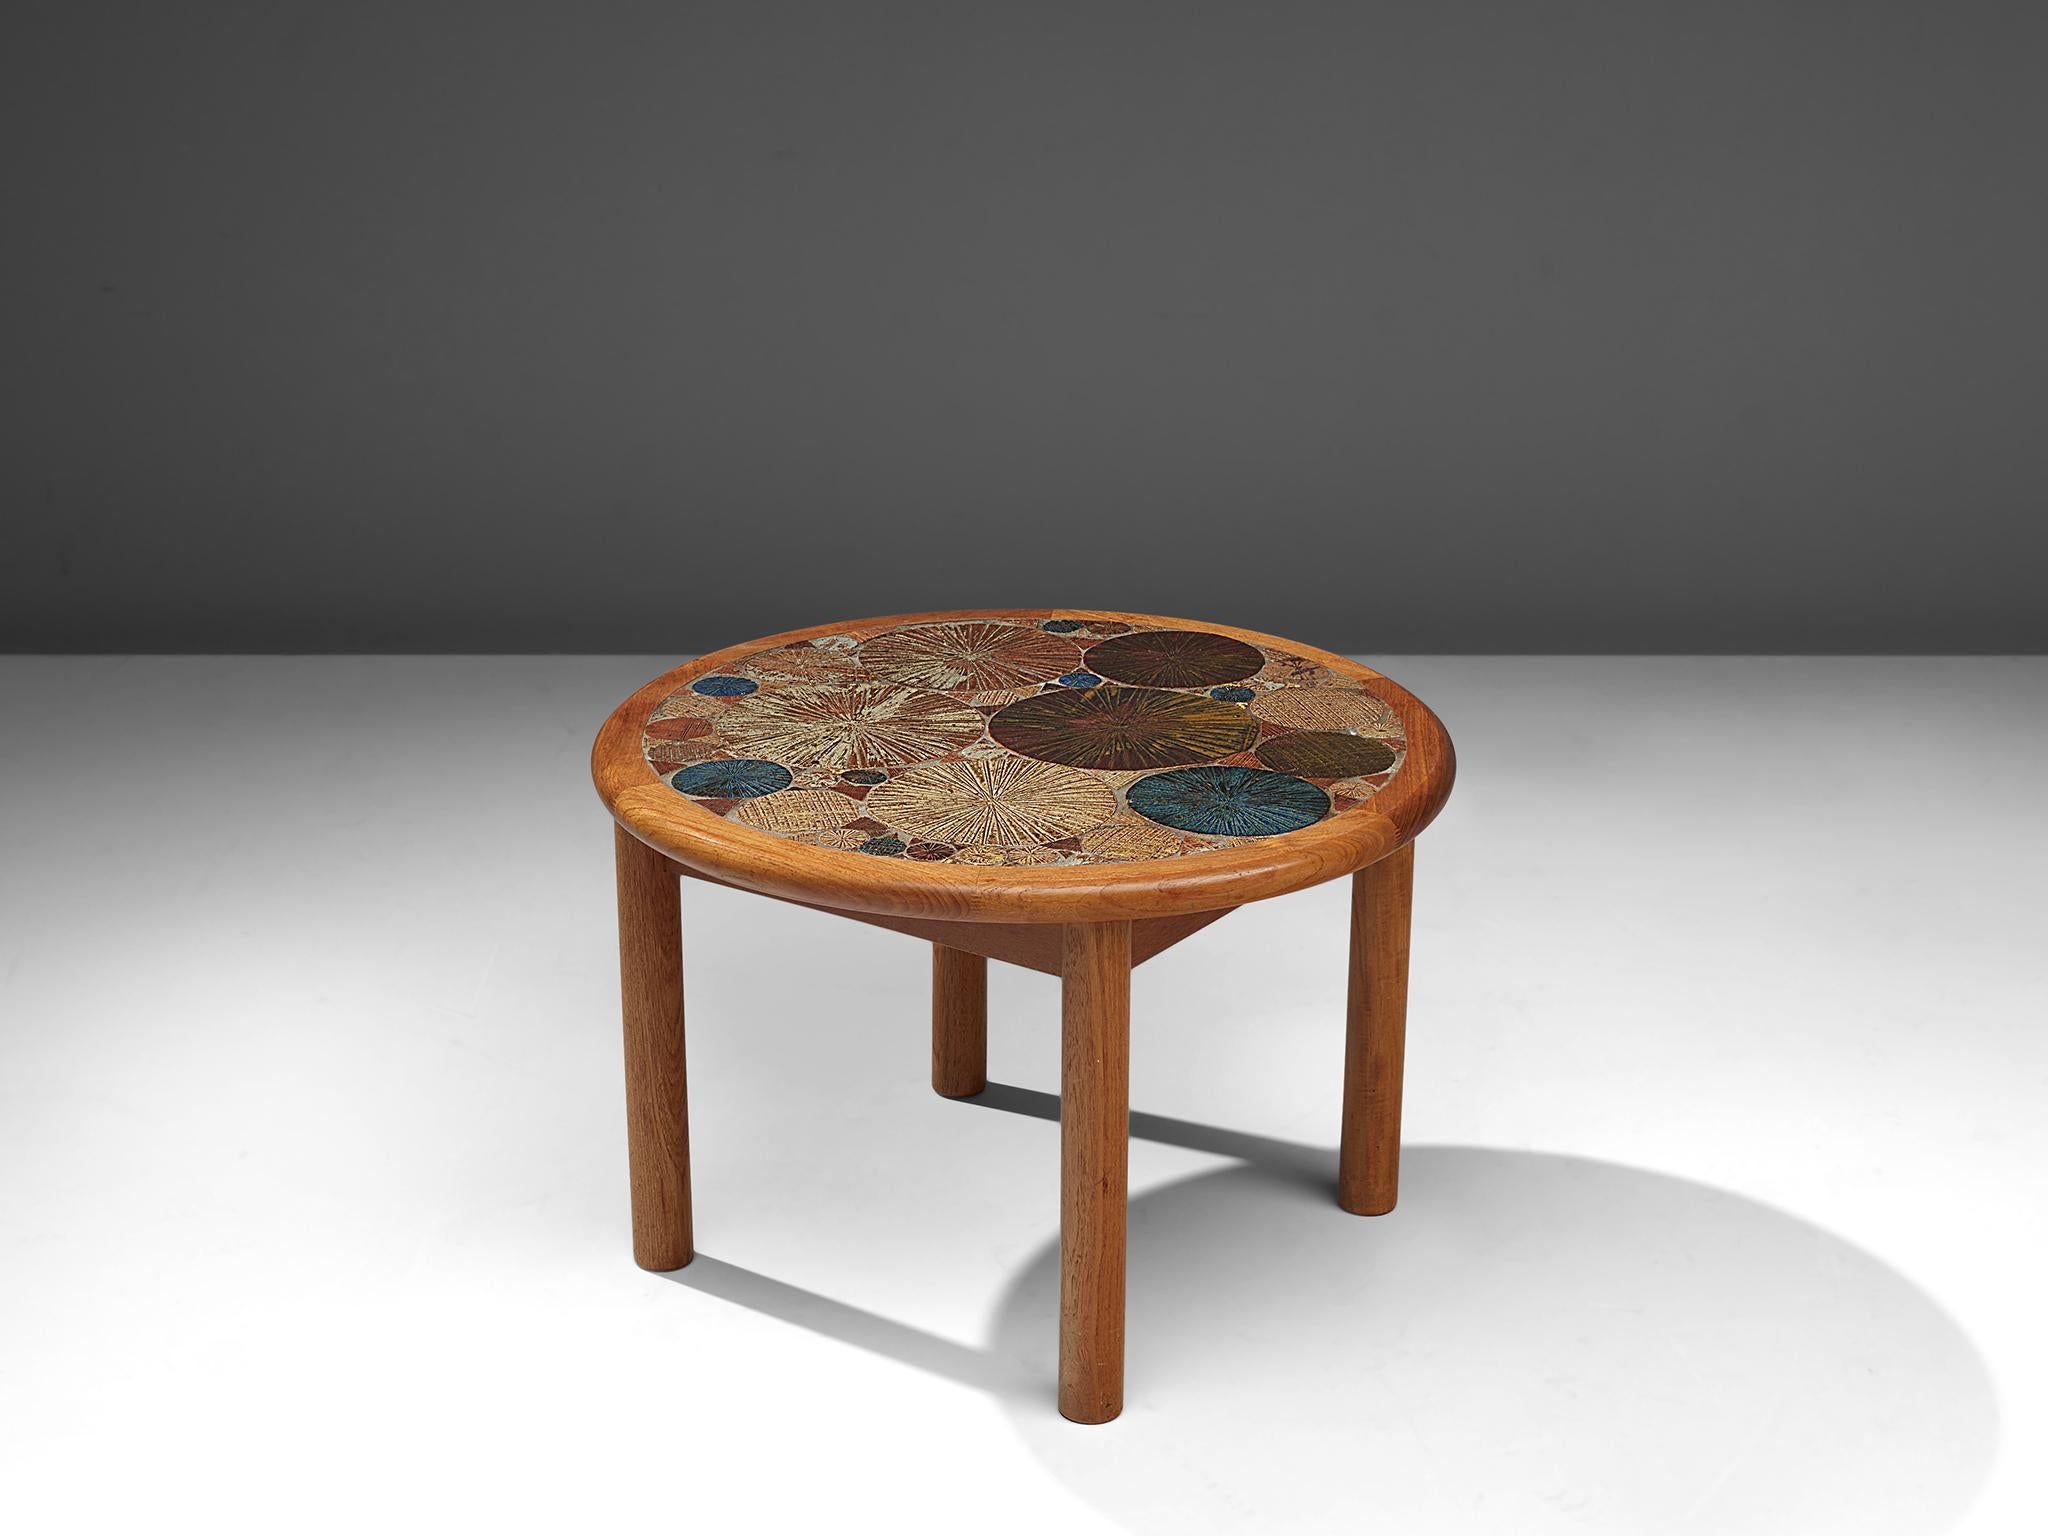 Tue Poulsen for Haslev Møbelsnedkeri, ceramic multicolored coffee table, ceramics and oak, Denmark, 1963.

This coffee table with a top with ceramic tile inlay is the ultimate symbiose between art and furniture. Multi-color textured tiles were